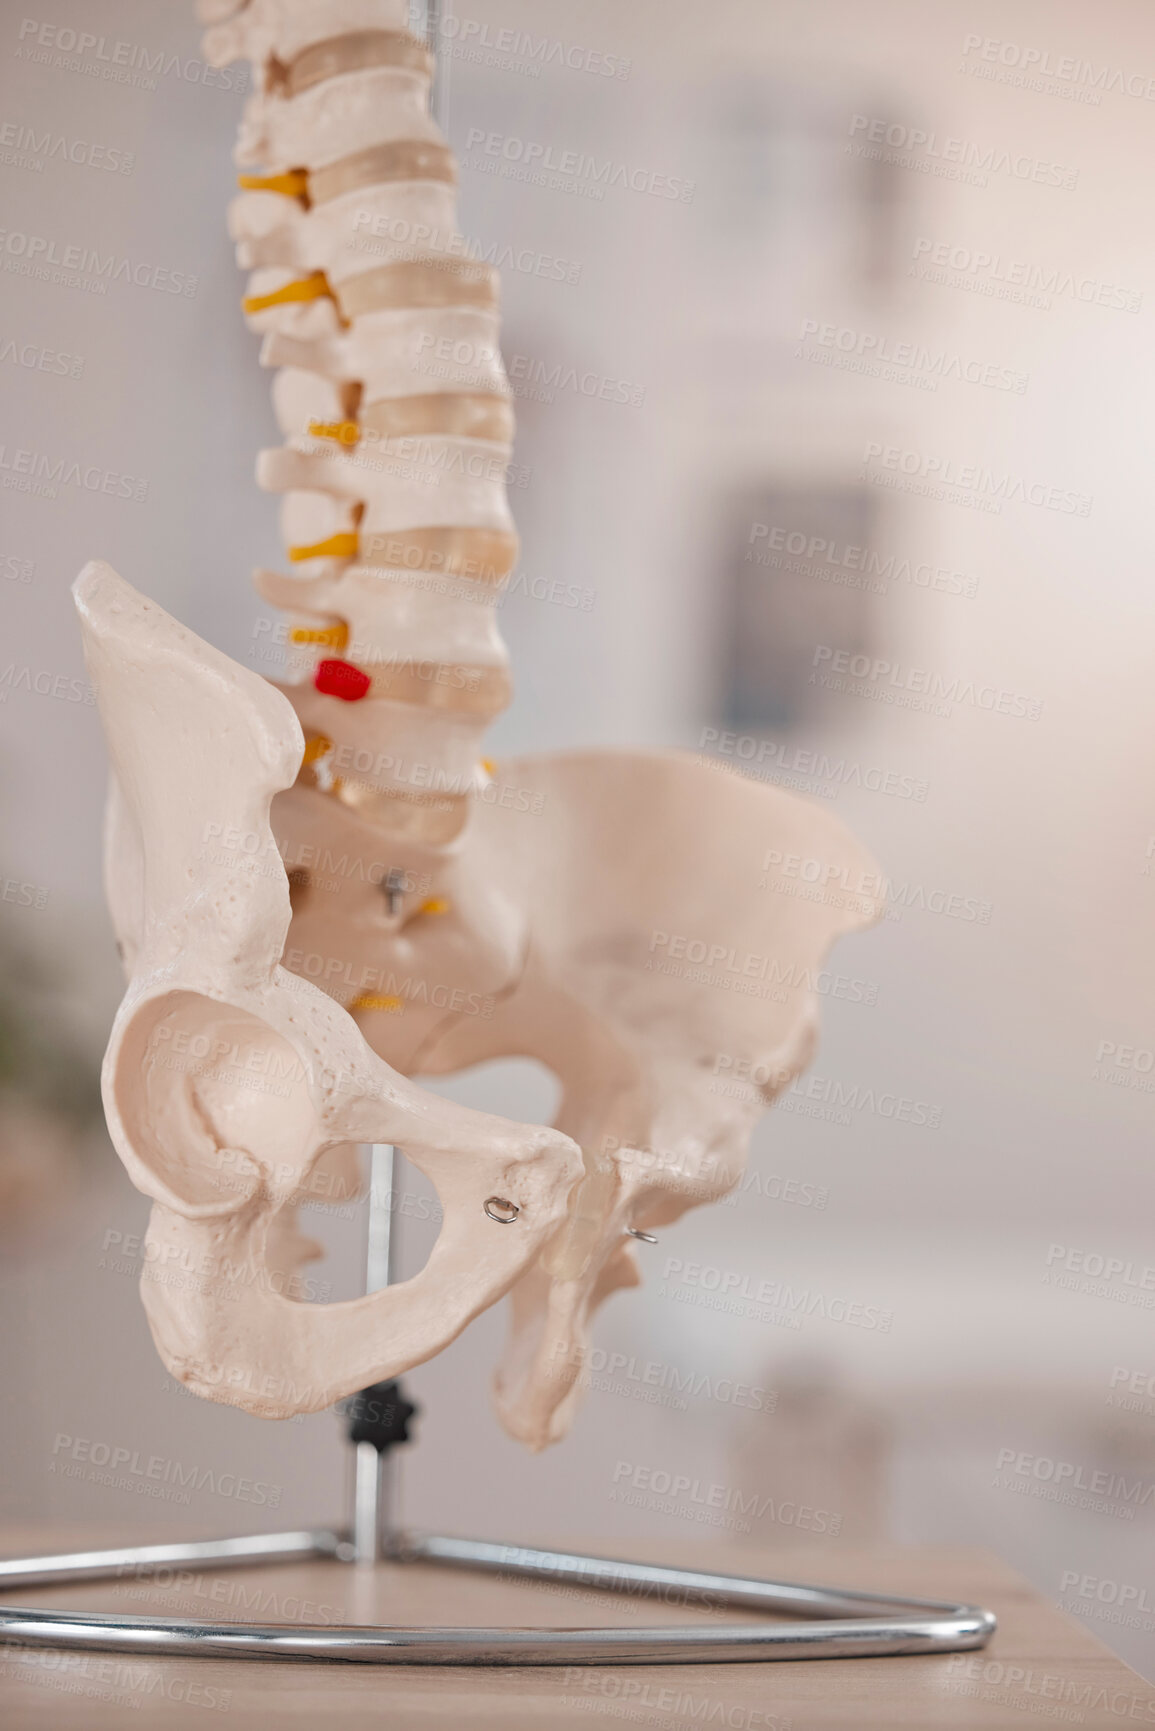 Buy stock photo Model hip, spine and chiropractic office on table, desk or display in study, education or learning. 3D print, human skeleton and background for chiropractor, physiotherapy or healthcare in clinic